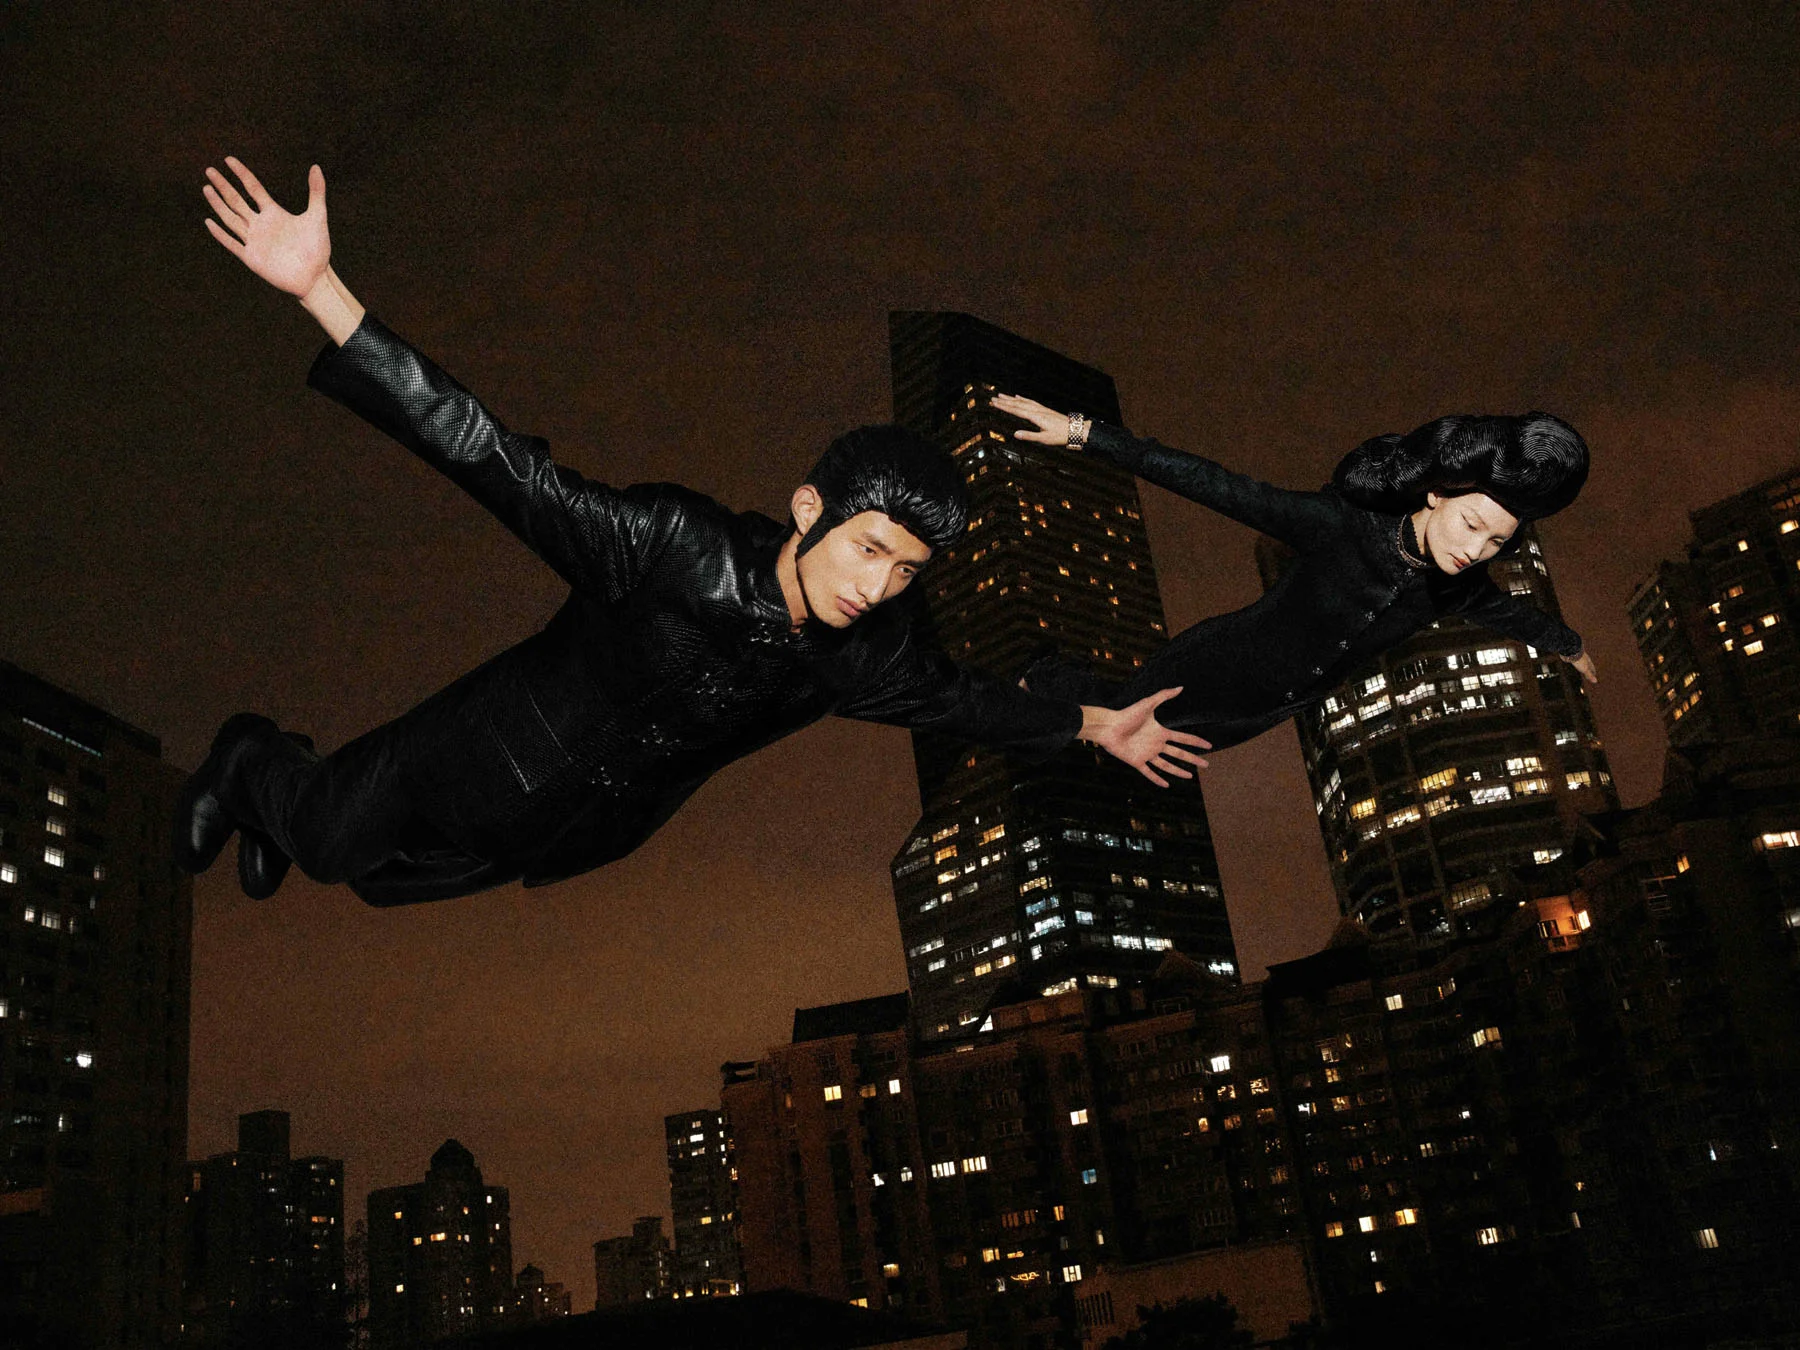 A photograph of male model Huang Liyang and female model Li Qian seemingly flying through the sky surrounded by the skyscrapers of nighttime Shanghai.